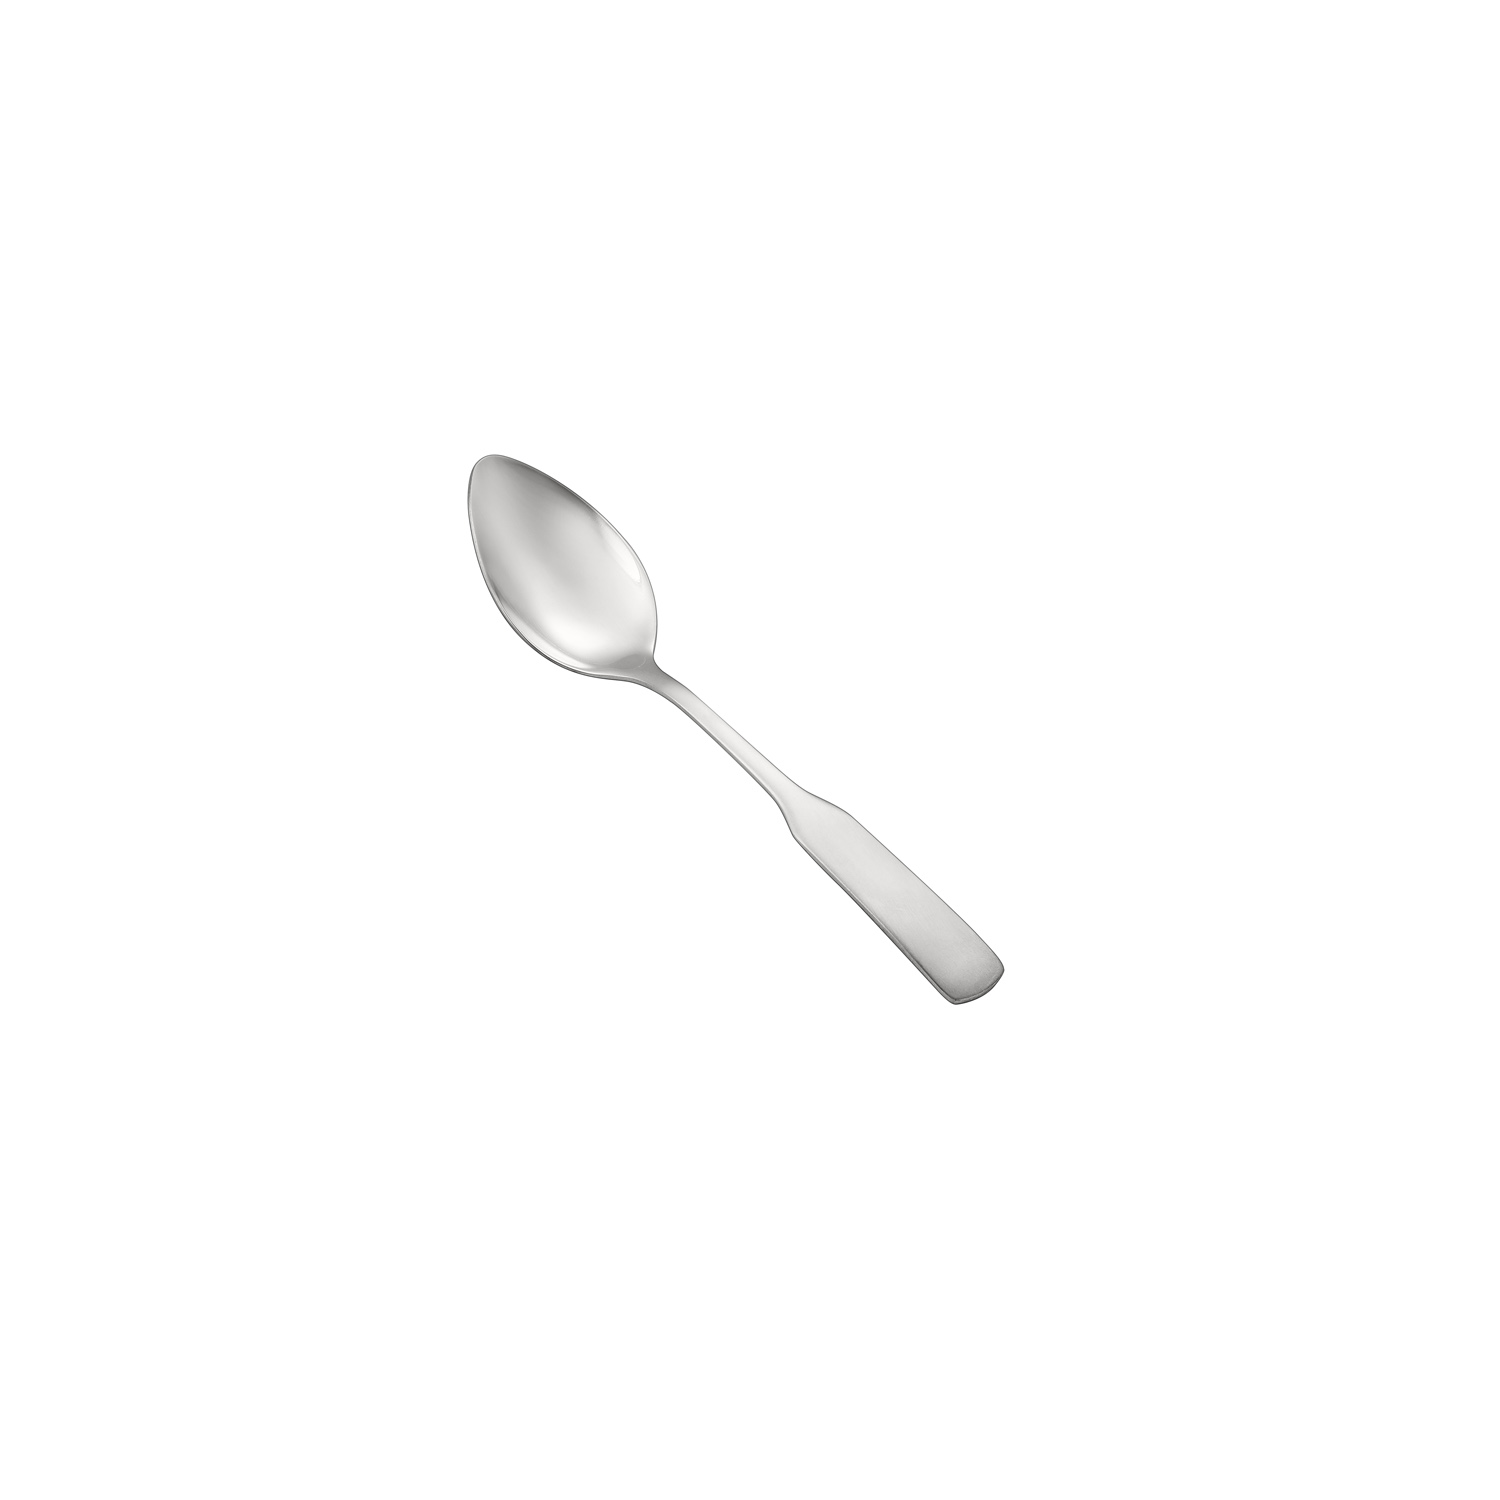 CAC China 3013-03 Thames Dinner Spoon, Heavyweight 18/0, 7 3/8"